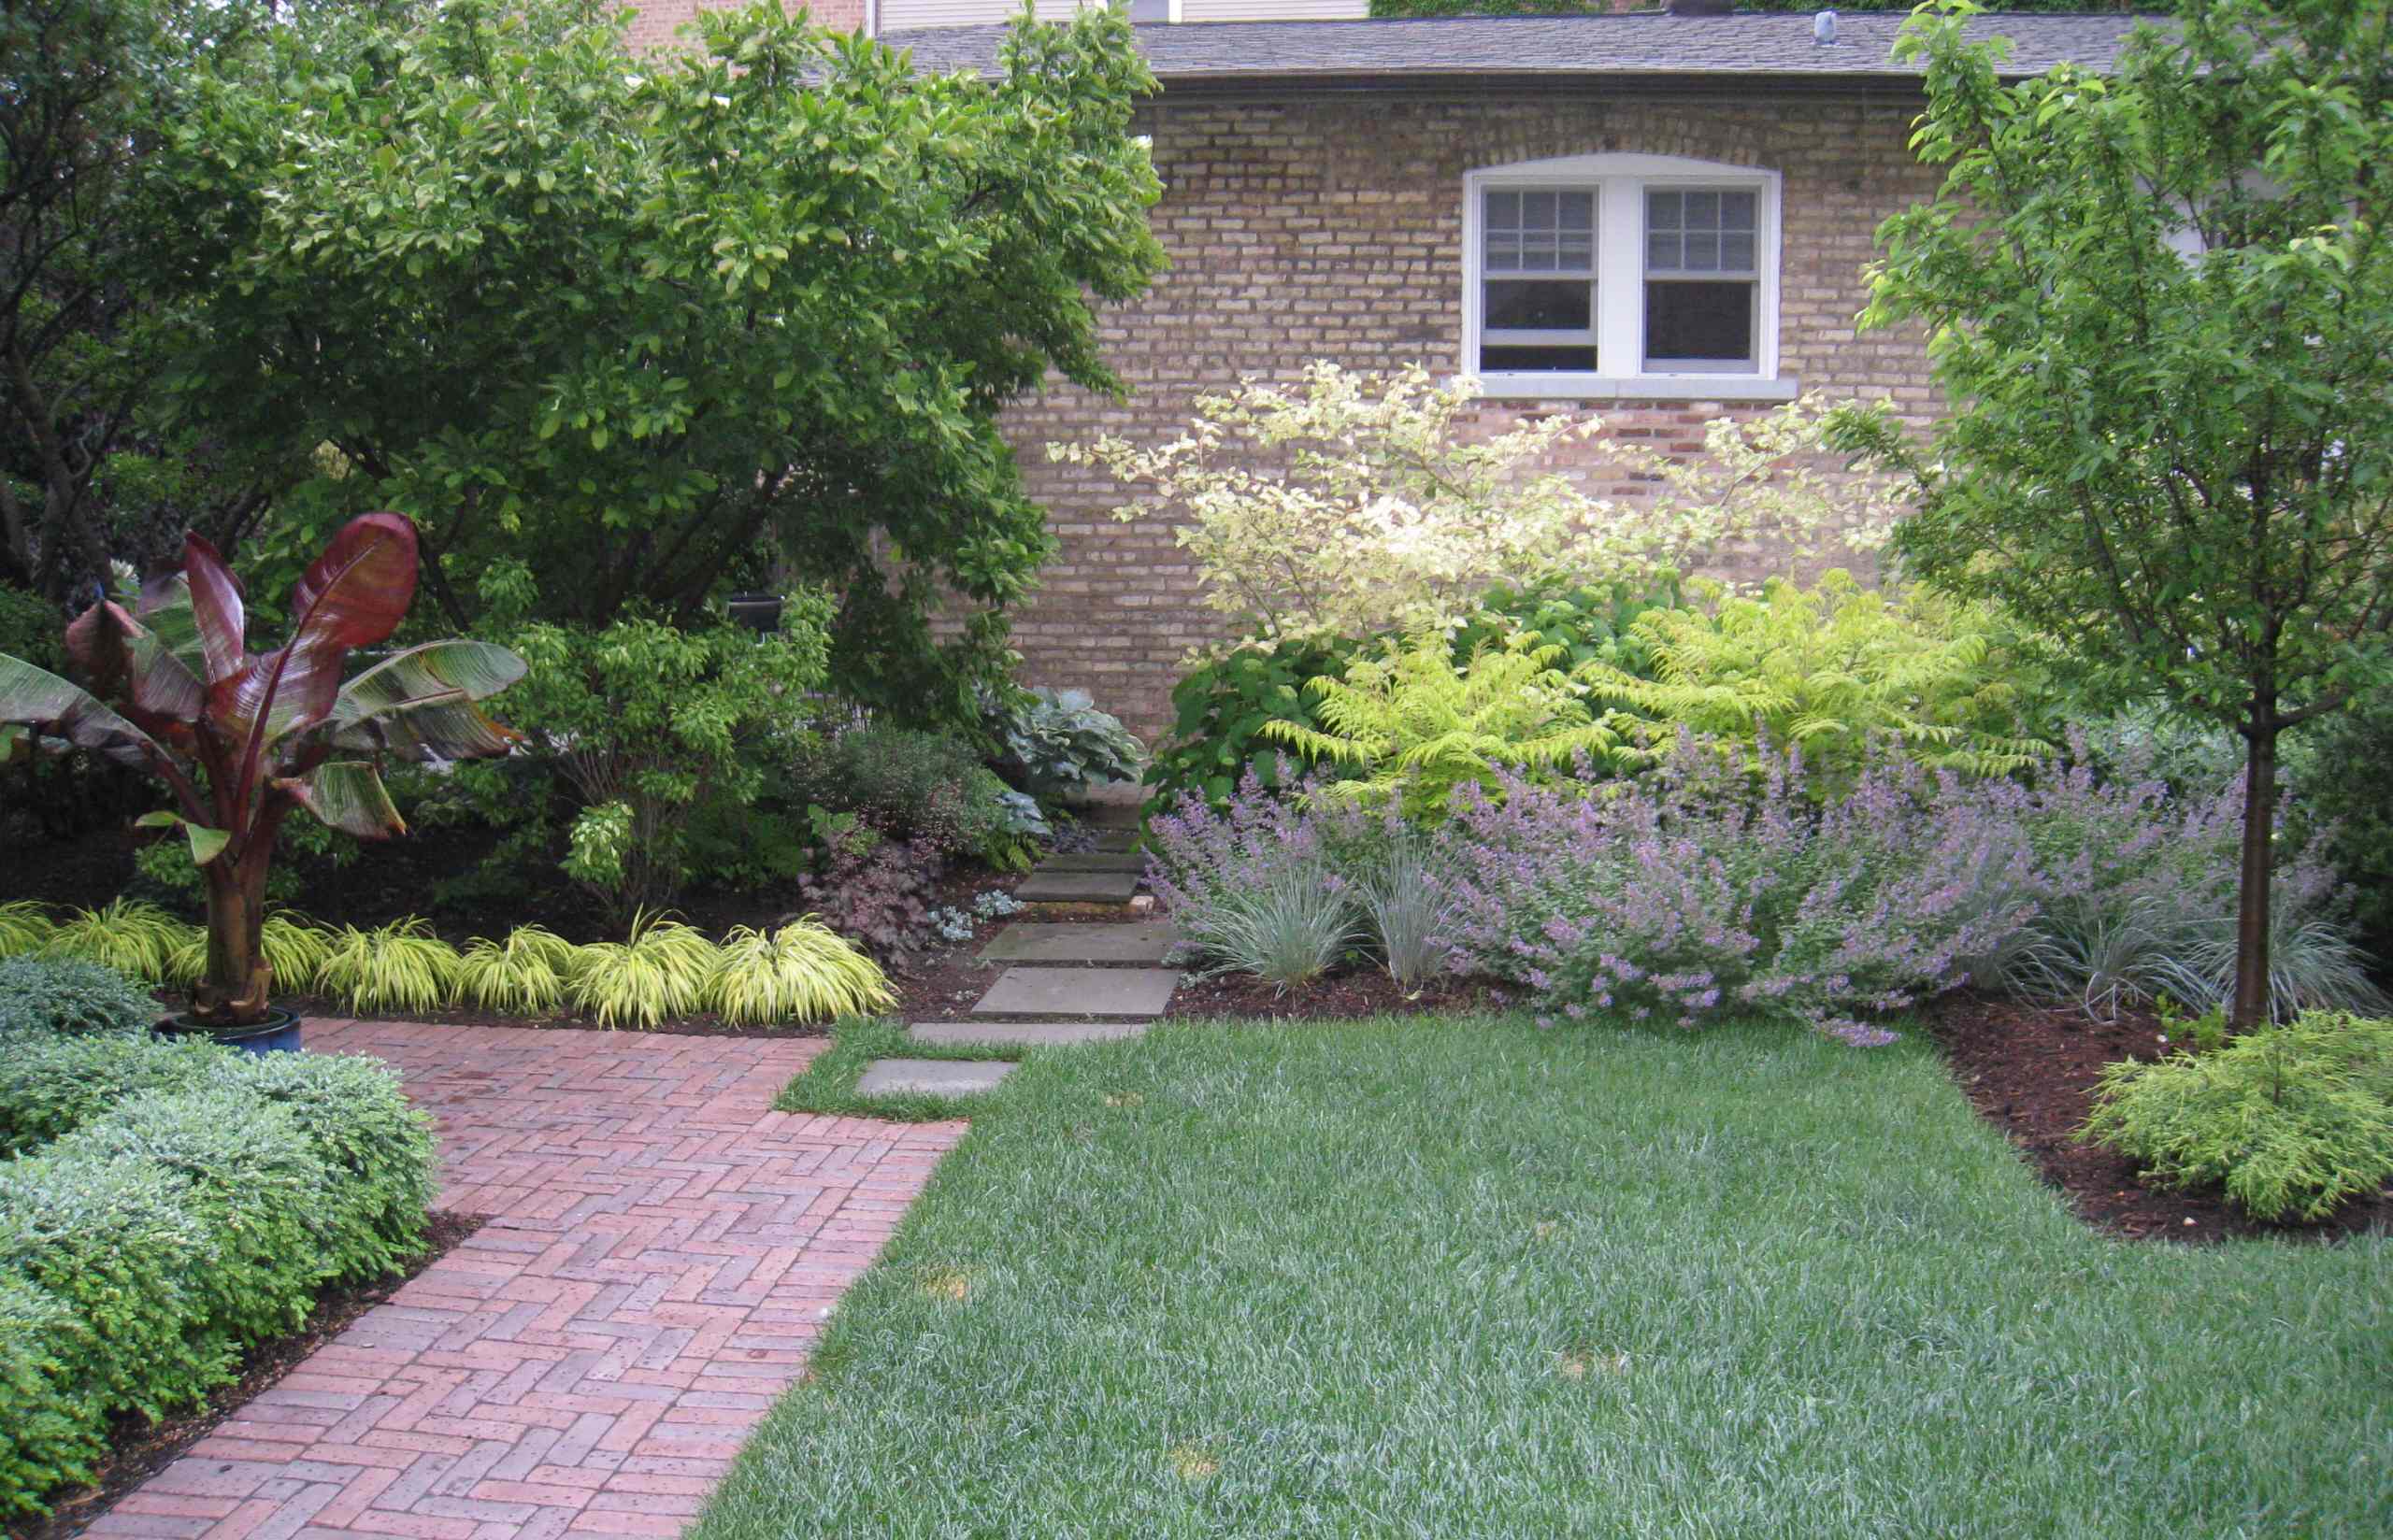 Plant beds separating the two properties